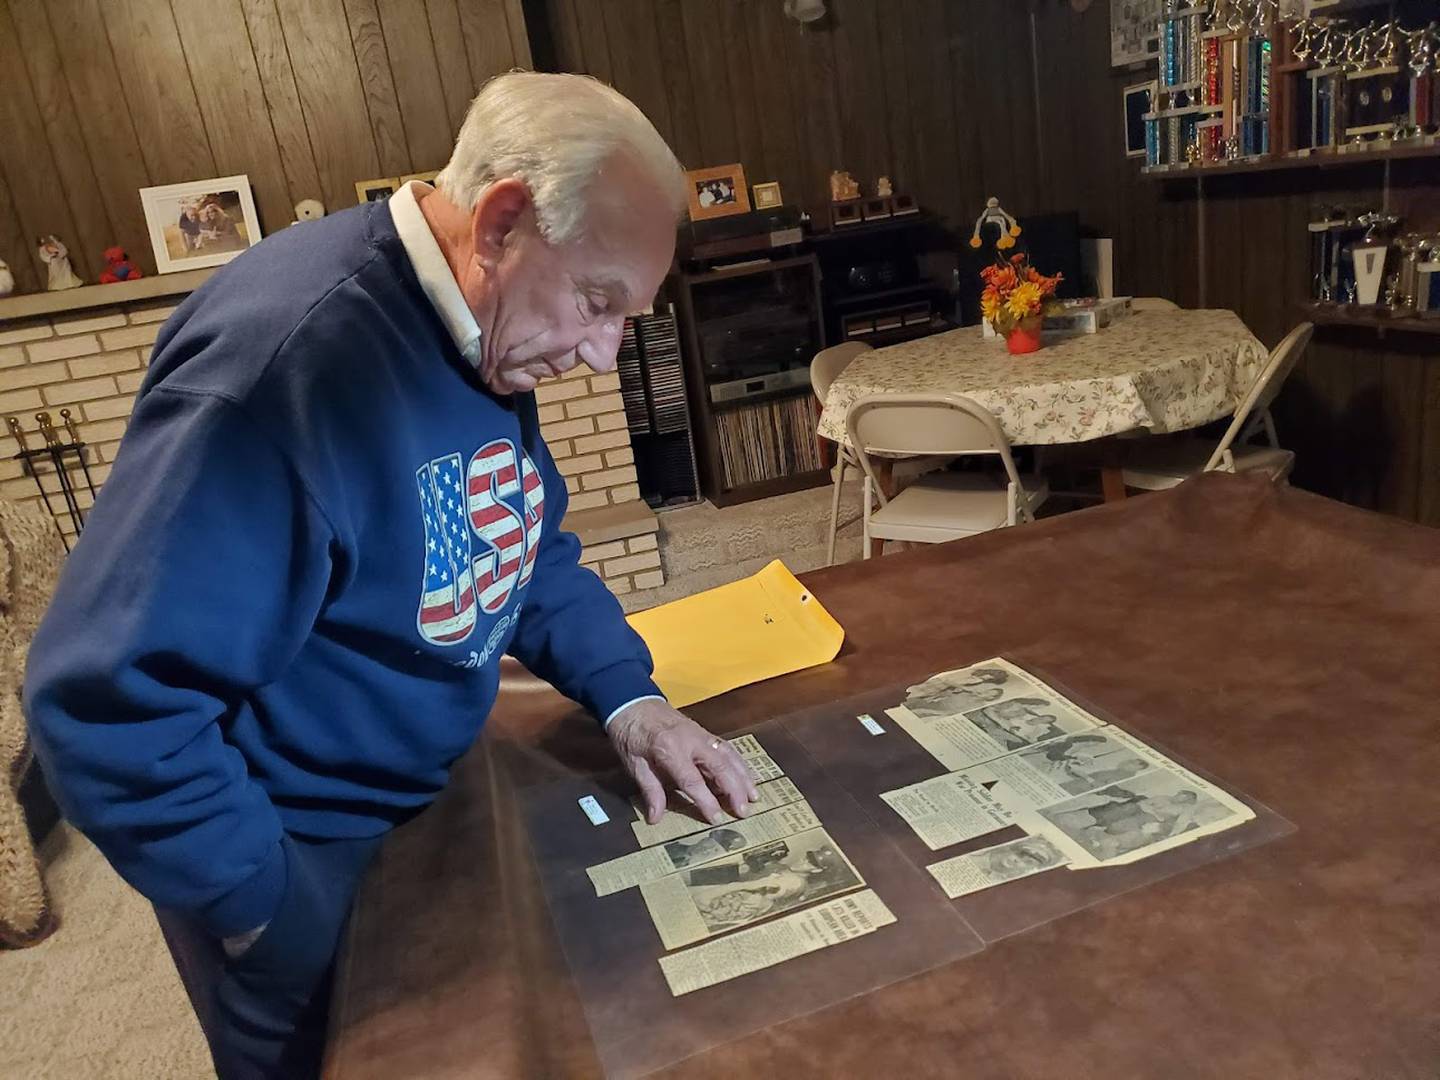 Diana and Robert Ceci of Joliet look through old clippings from The Herald-News that Robert's mother Beverly Ceci had saved and laminated. These clippings are the only record Robert has of his father David Ceci's military service. David Ceci and four of his brothers had all served in the Army during World War II. One was killed in action and another was pronounced missing in action but later came home.